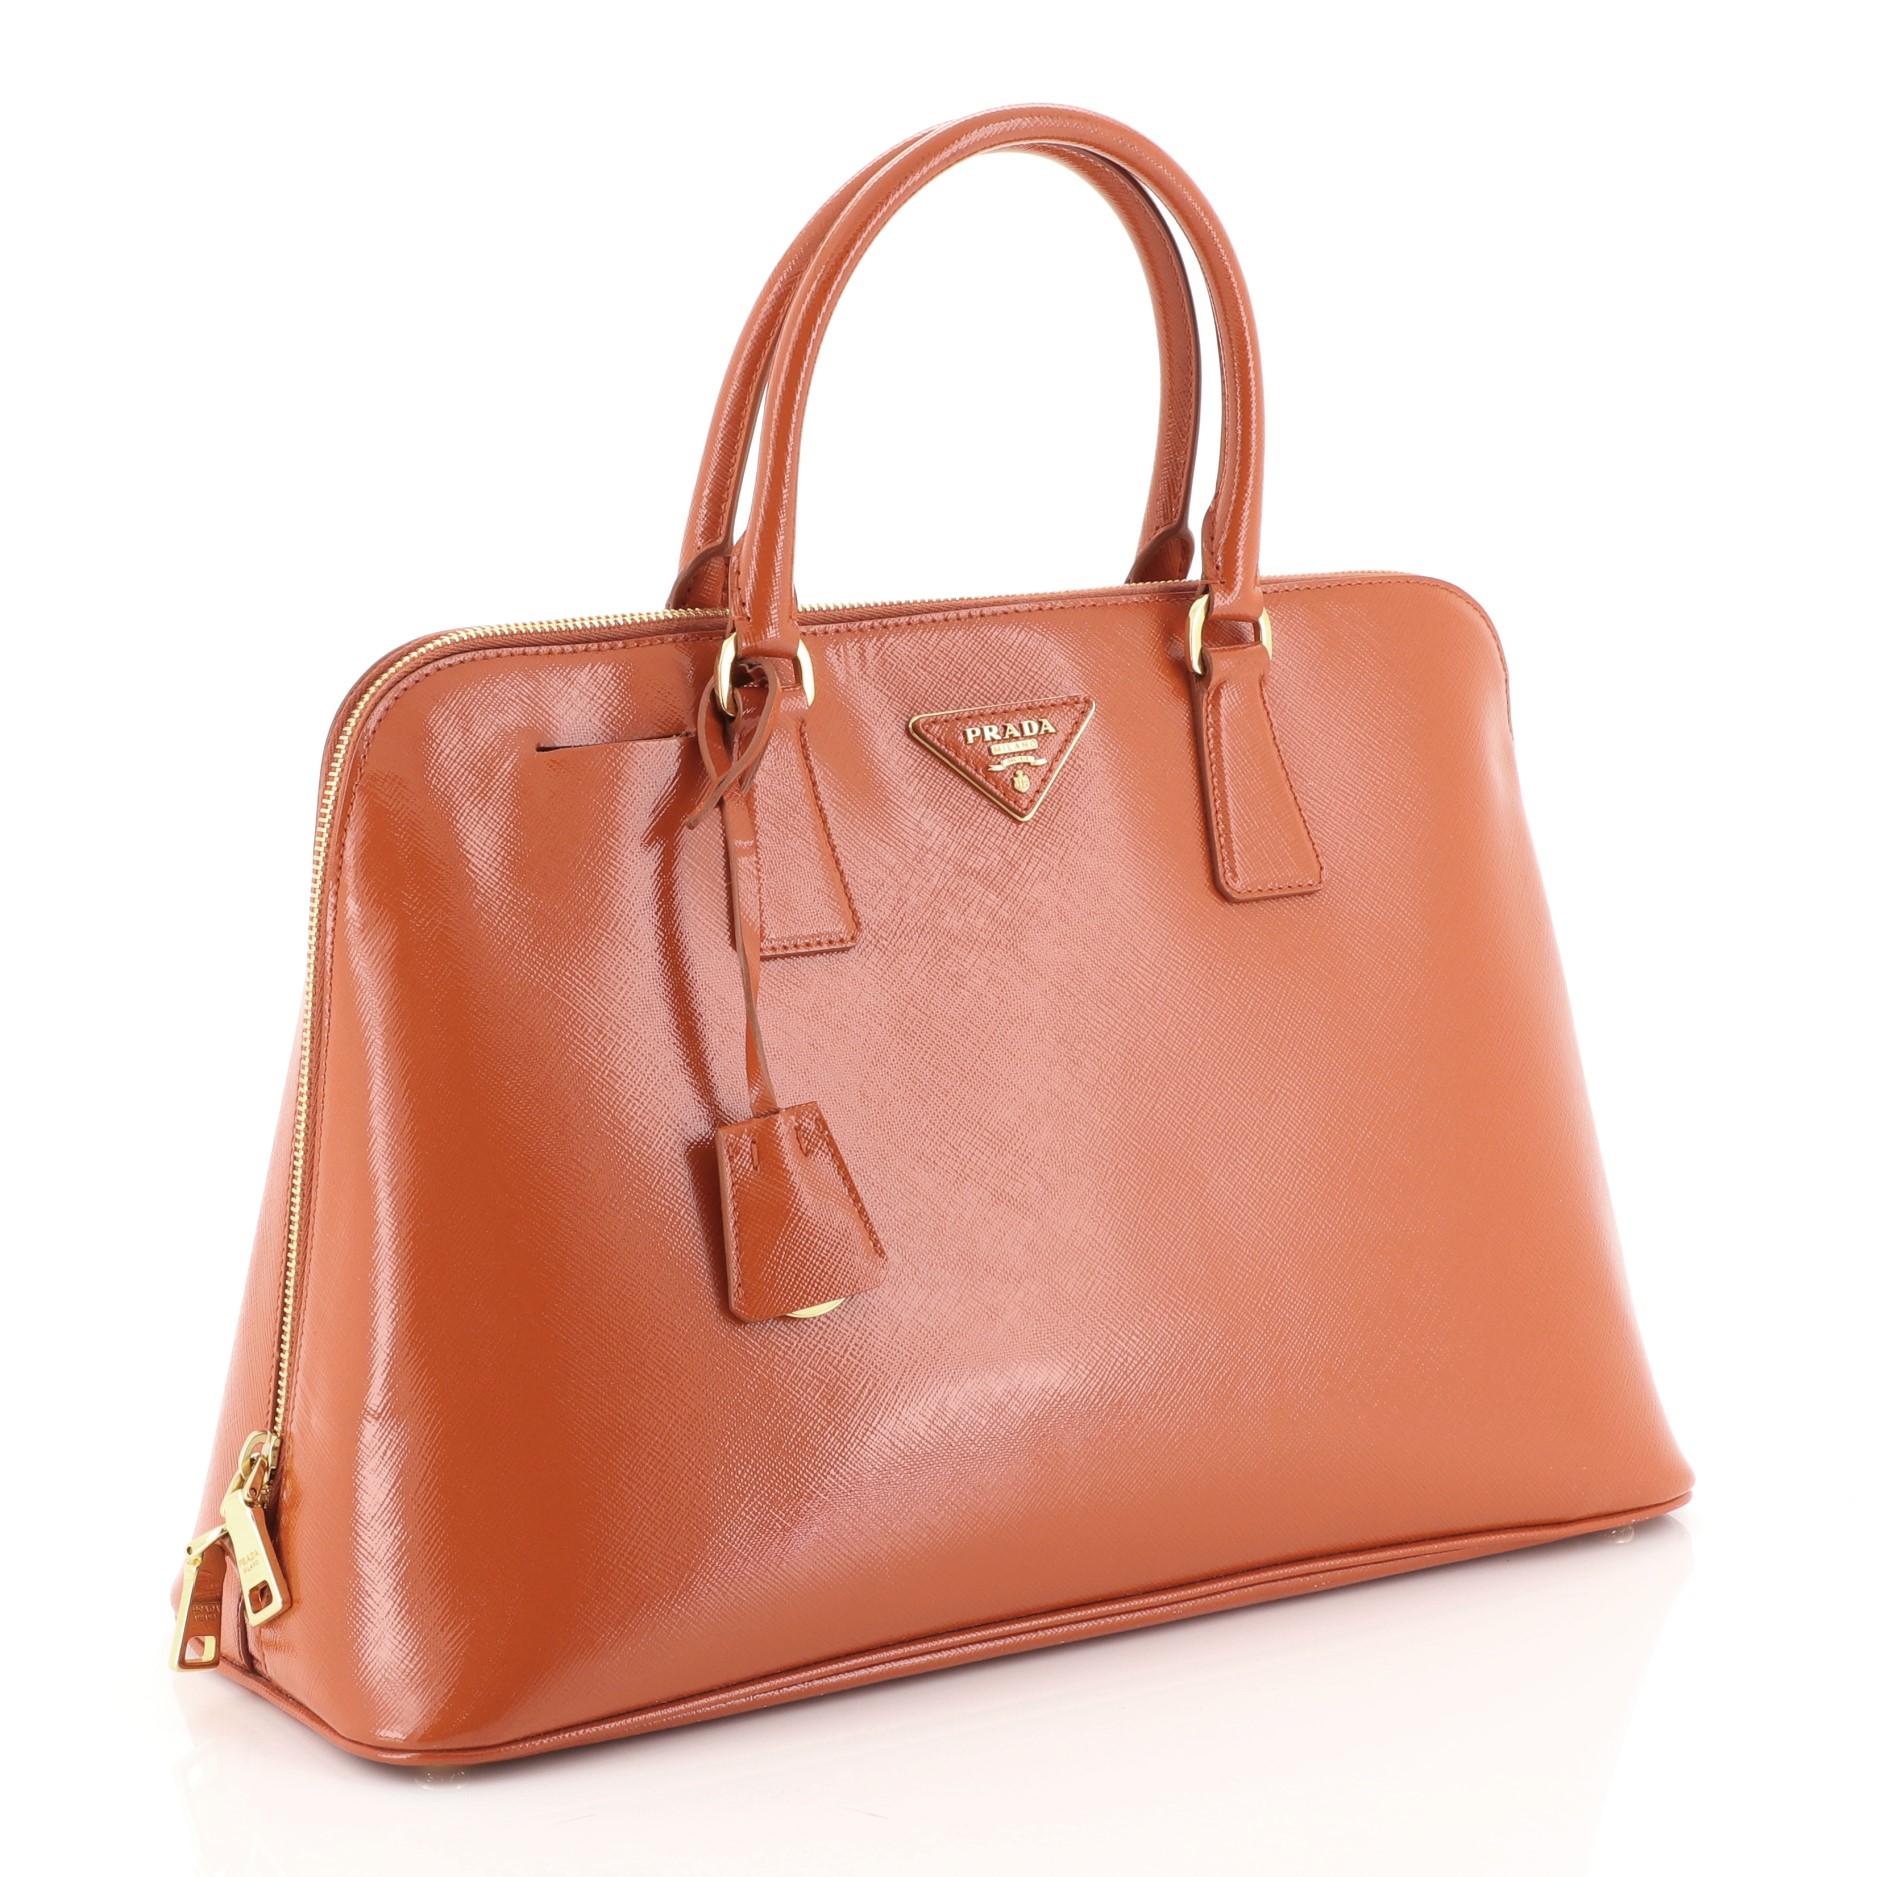 This Prada Promenade Bag Vernice Saffiano Leather Large, crafted from orange vernice saffiano leather, features dual rolled handles, triangle Prada logo, and gold-tone hardware. Its two-way zip closure opens to an orange fabric interior with a